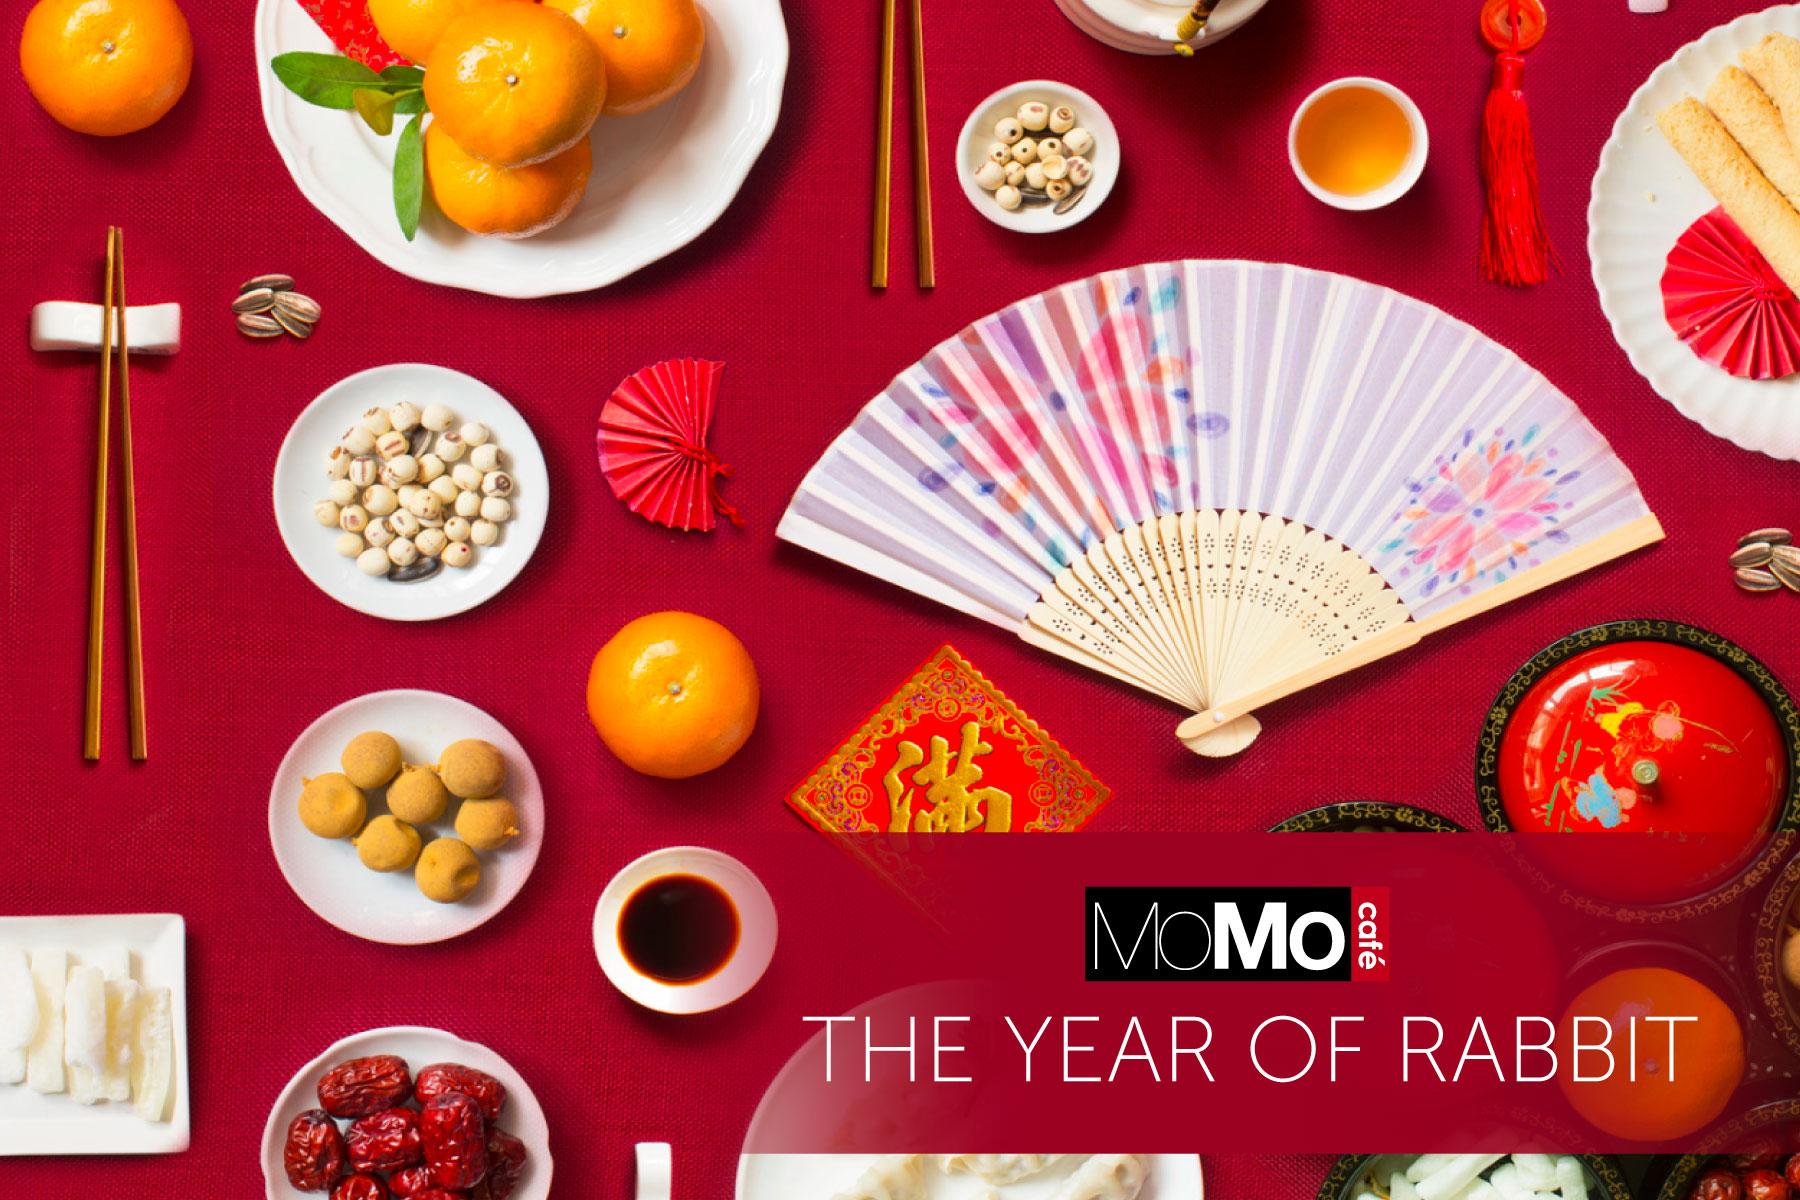 Ring in the Lunar celebrations with your family at MOMO Cafe